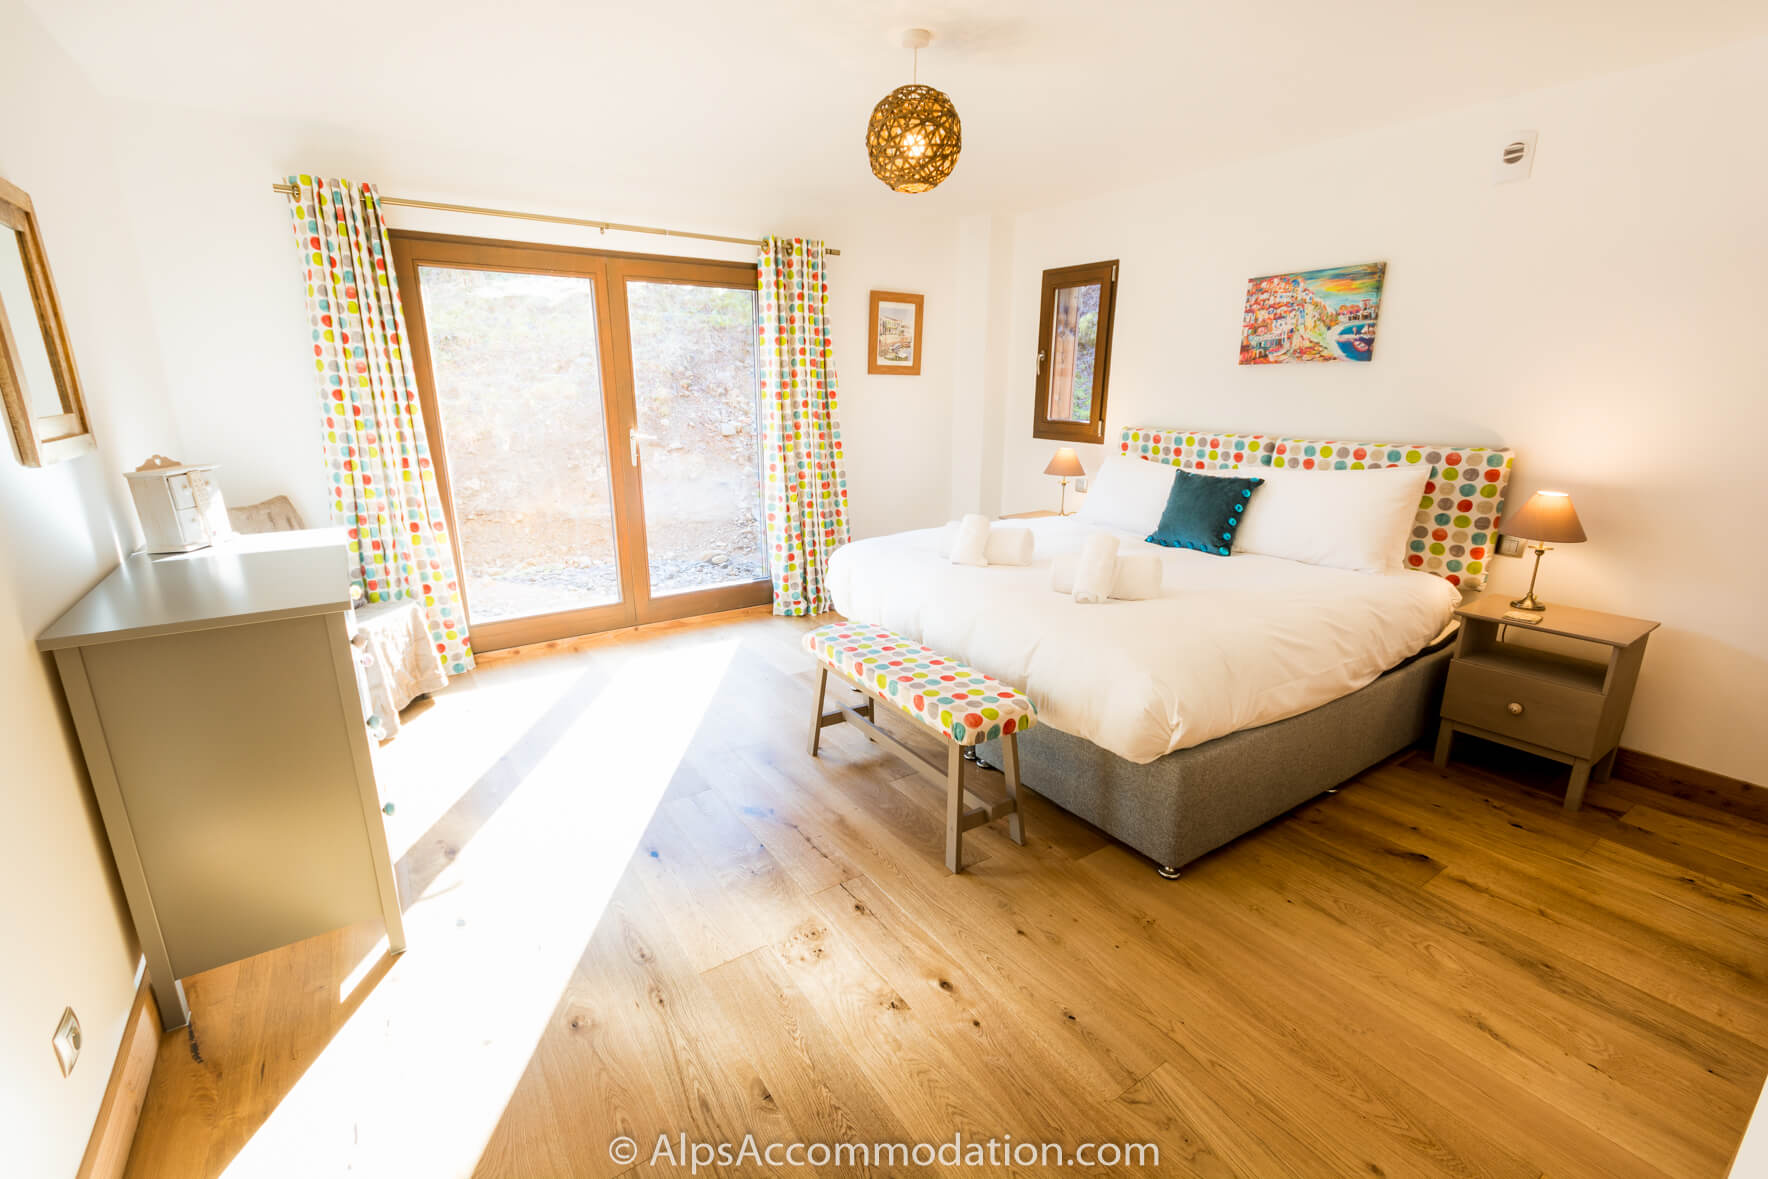 Chalet Gentian Samoëns - Spacious ensuite bedroom with direct access to the scenic outdoor areas